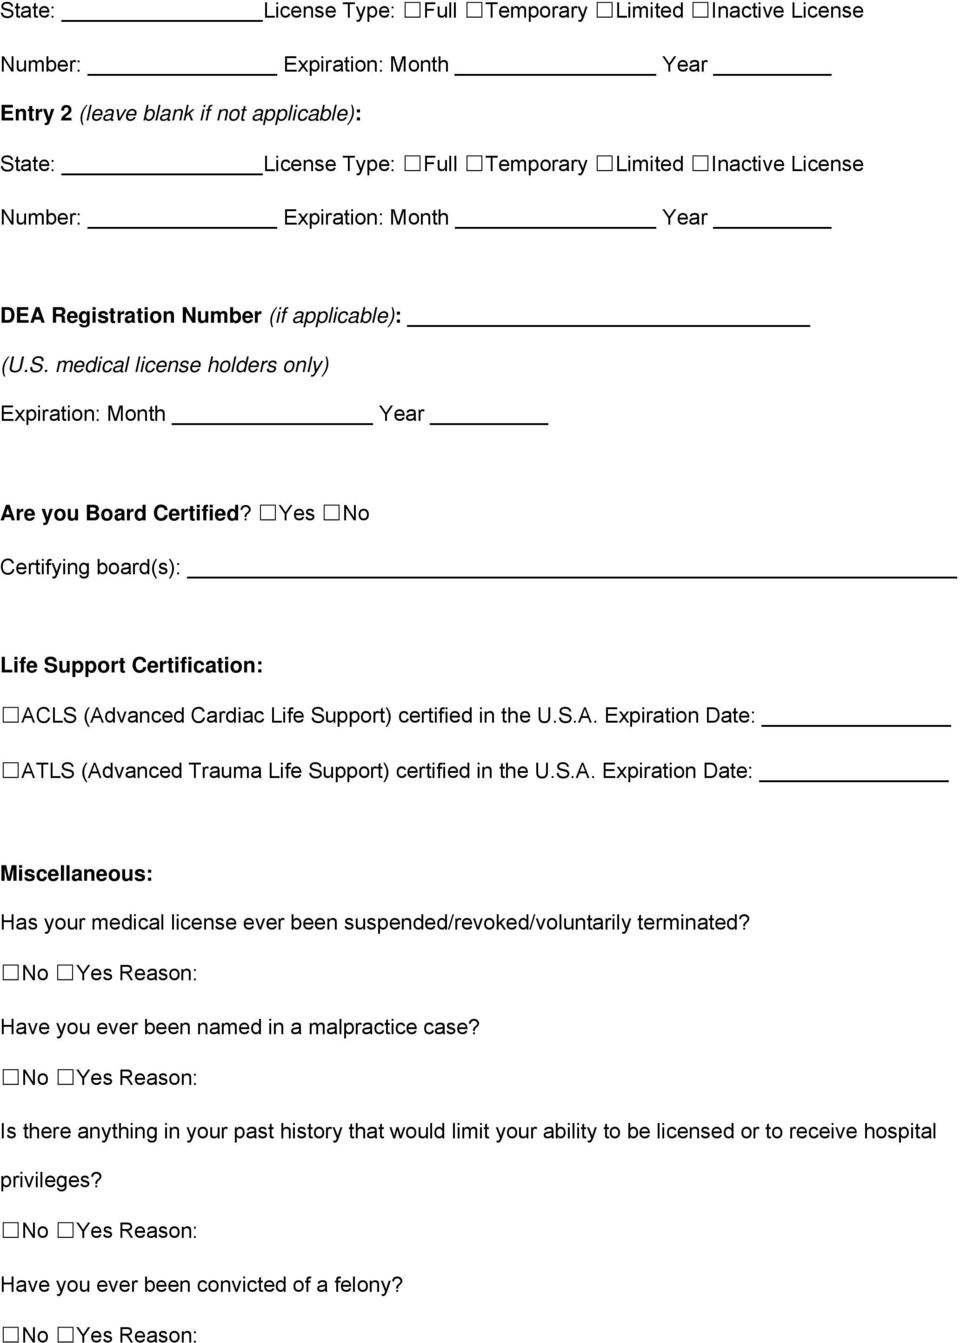 Yes No Certifying board(s): Life Support Certification: ACLS (Advanced Cardiac Life Support) certified in the U.S.A. Expiration Date: ATLS (Advanced Trauma Life Support) certified in the U.S.A. Expiration Date: Miscellaneous: Has your medical license ever been suspended/revoked/voluntarily terminated?